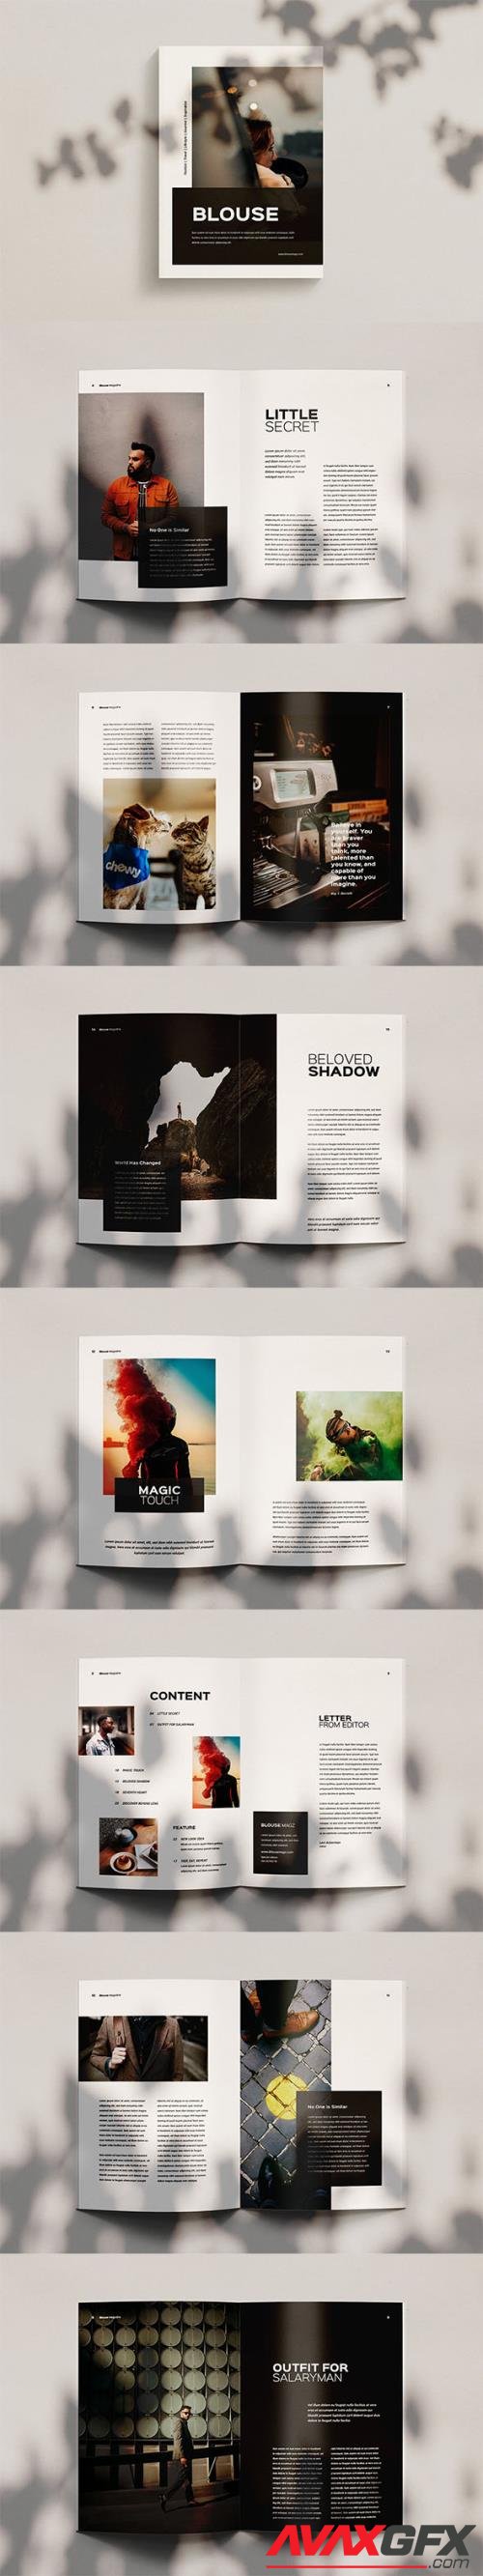 Blouse - Magazine Template Indesign